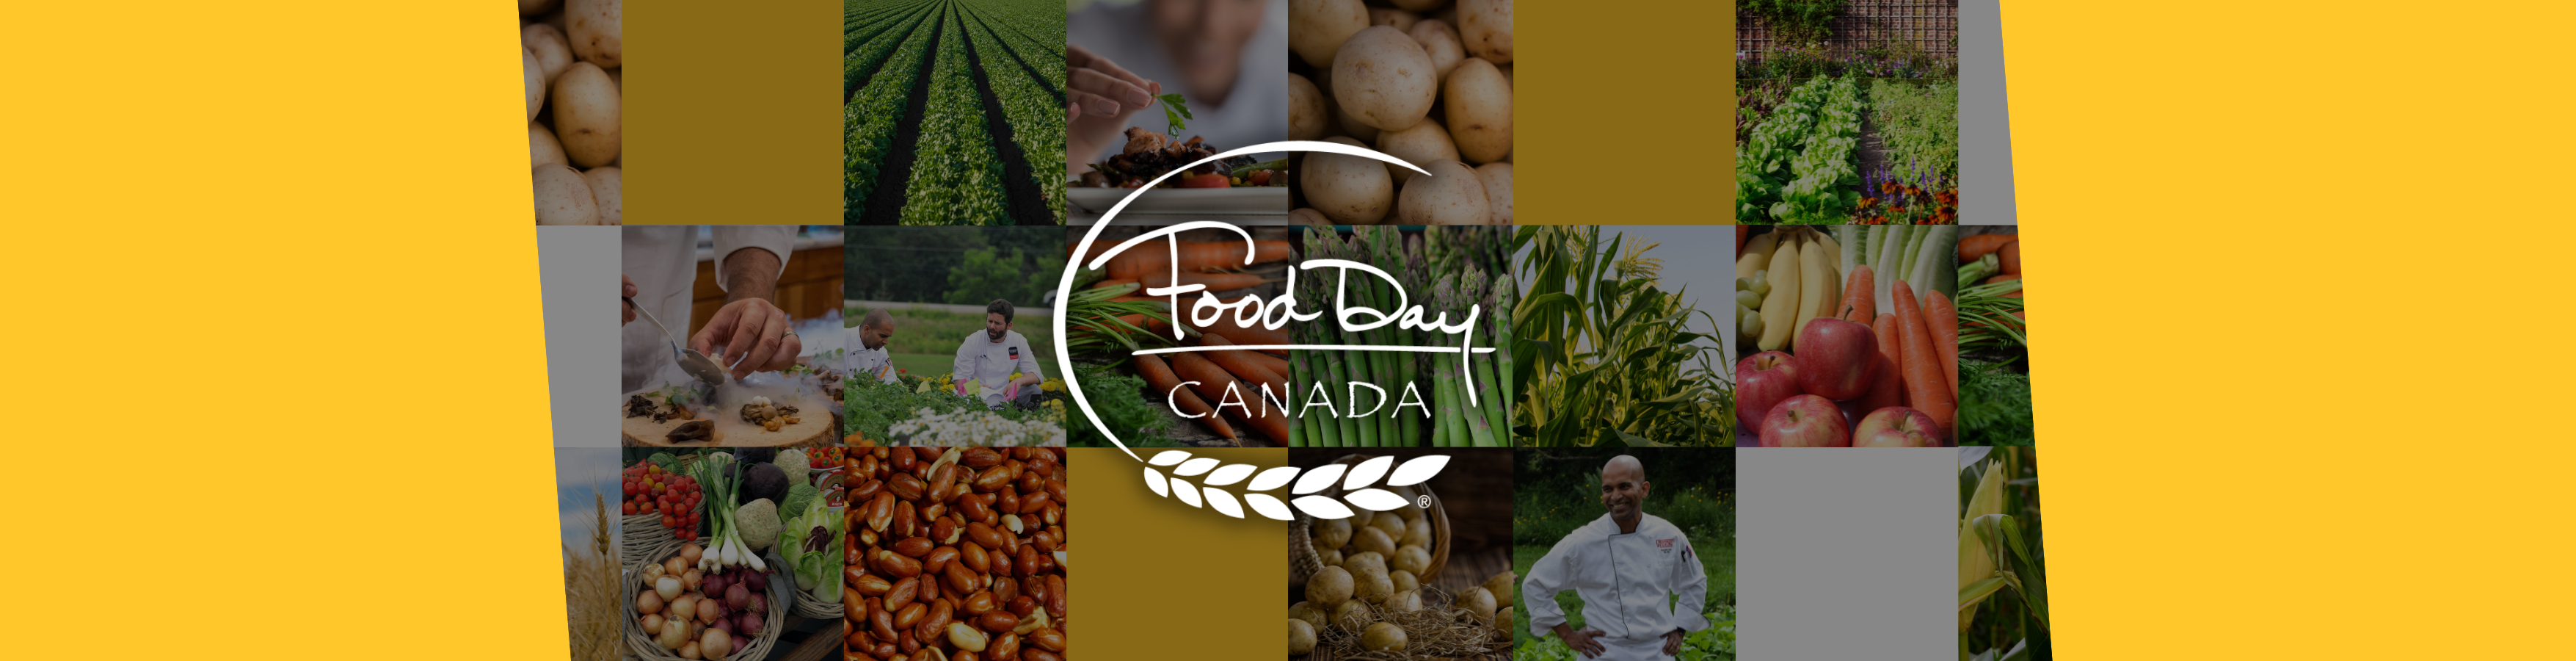 Food Day Canada. A grid of pictures of various foods, producers and chefs, including field of green crops, a bed of lettuce, a pile of potatoes, a hand plating food, chefs picking produce, carrots, asparagus, corn, and onions.